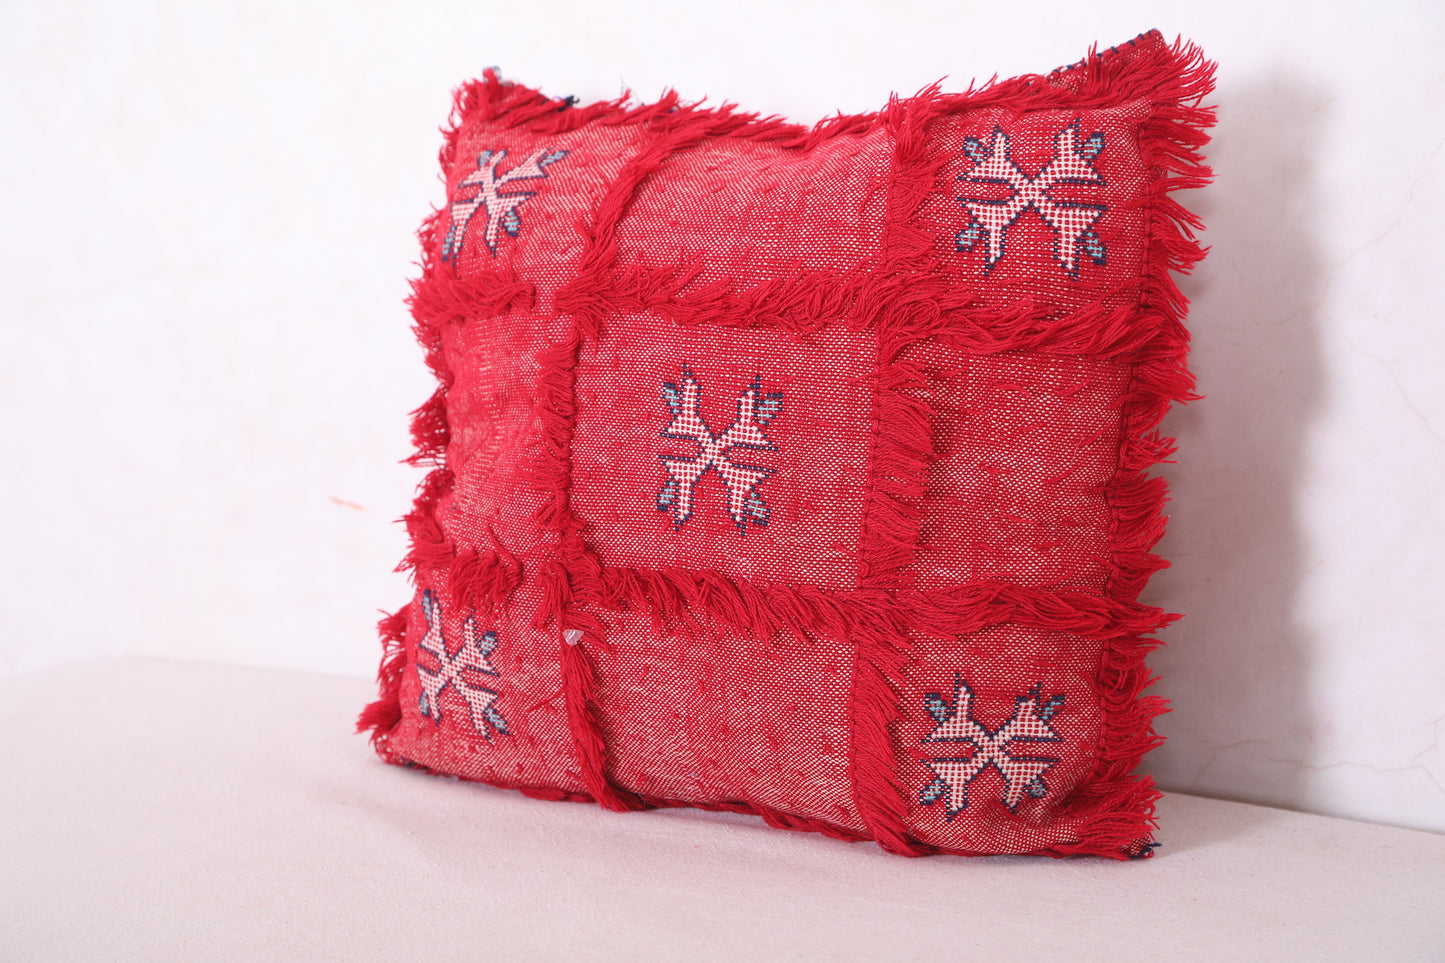 Moroccan Pillow Red 16.1 INCHES X 16.1 INCHES